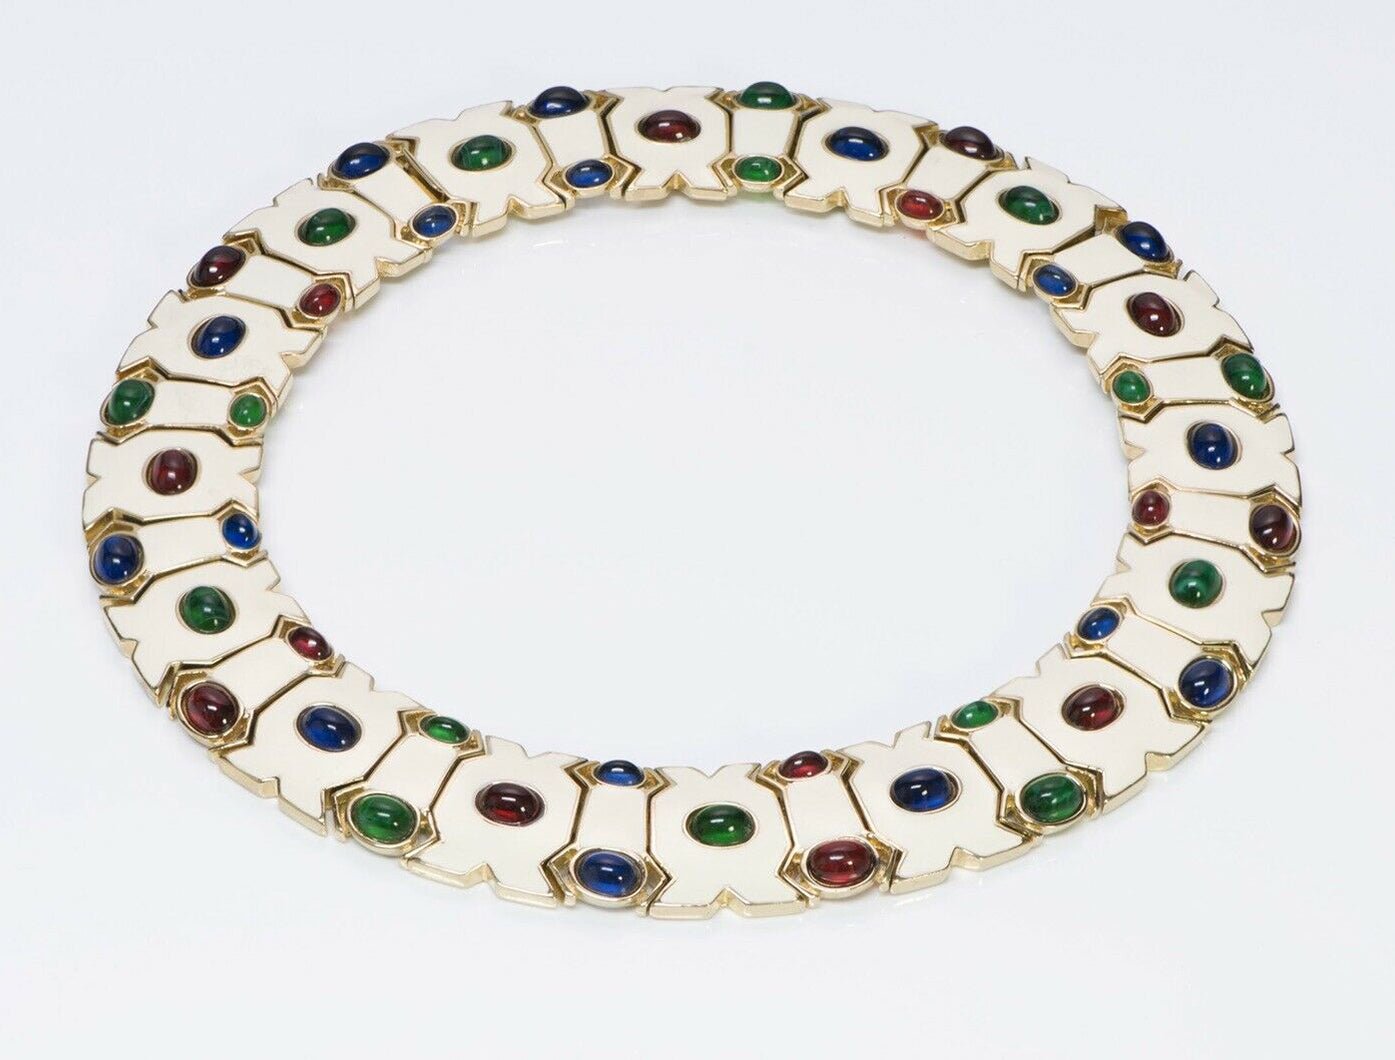 CINER Wide White Enamel Green Blue Red Cabochon Glass Collar Necklace - DSF Antique Jewelry